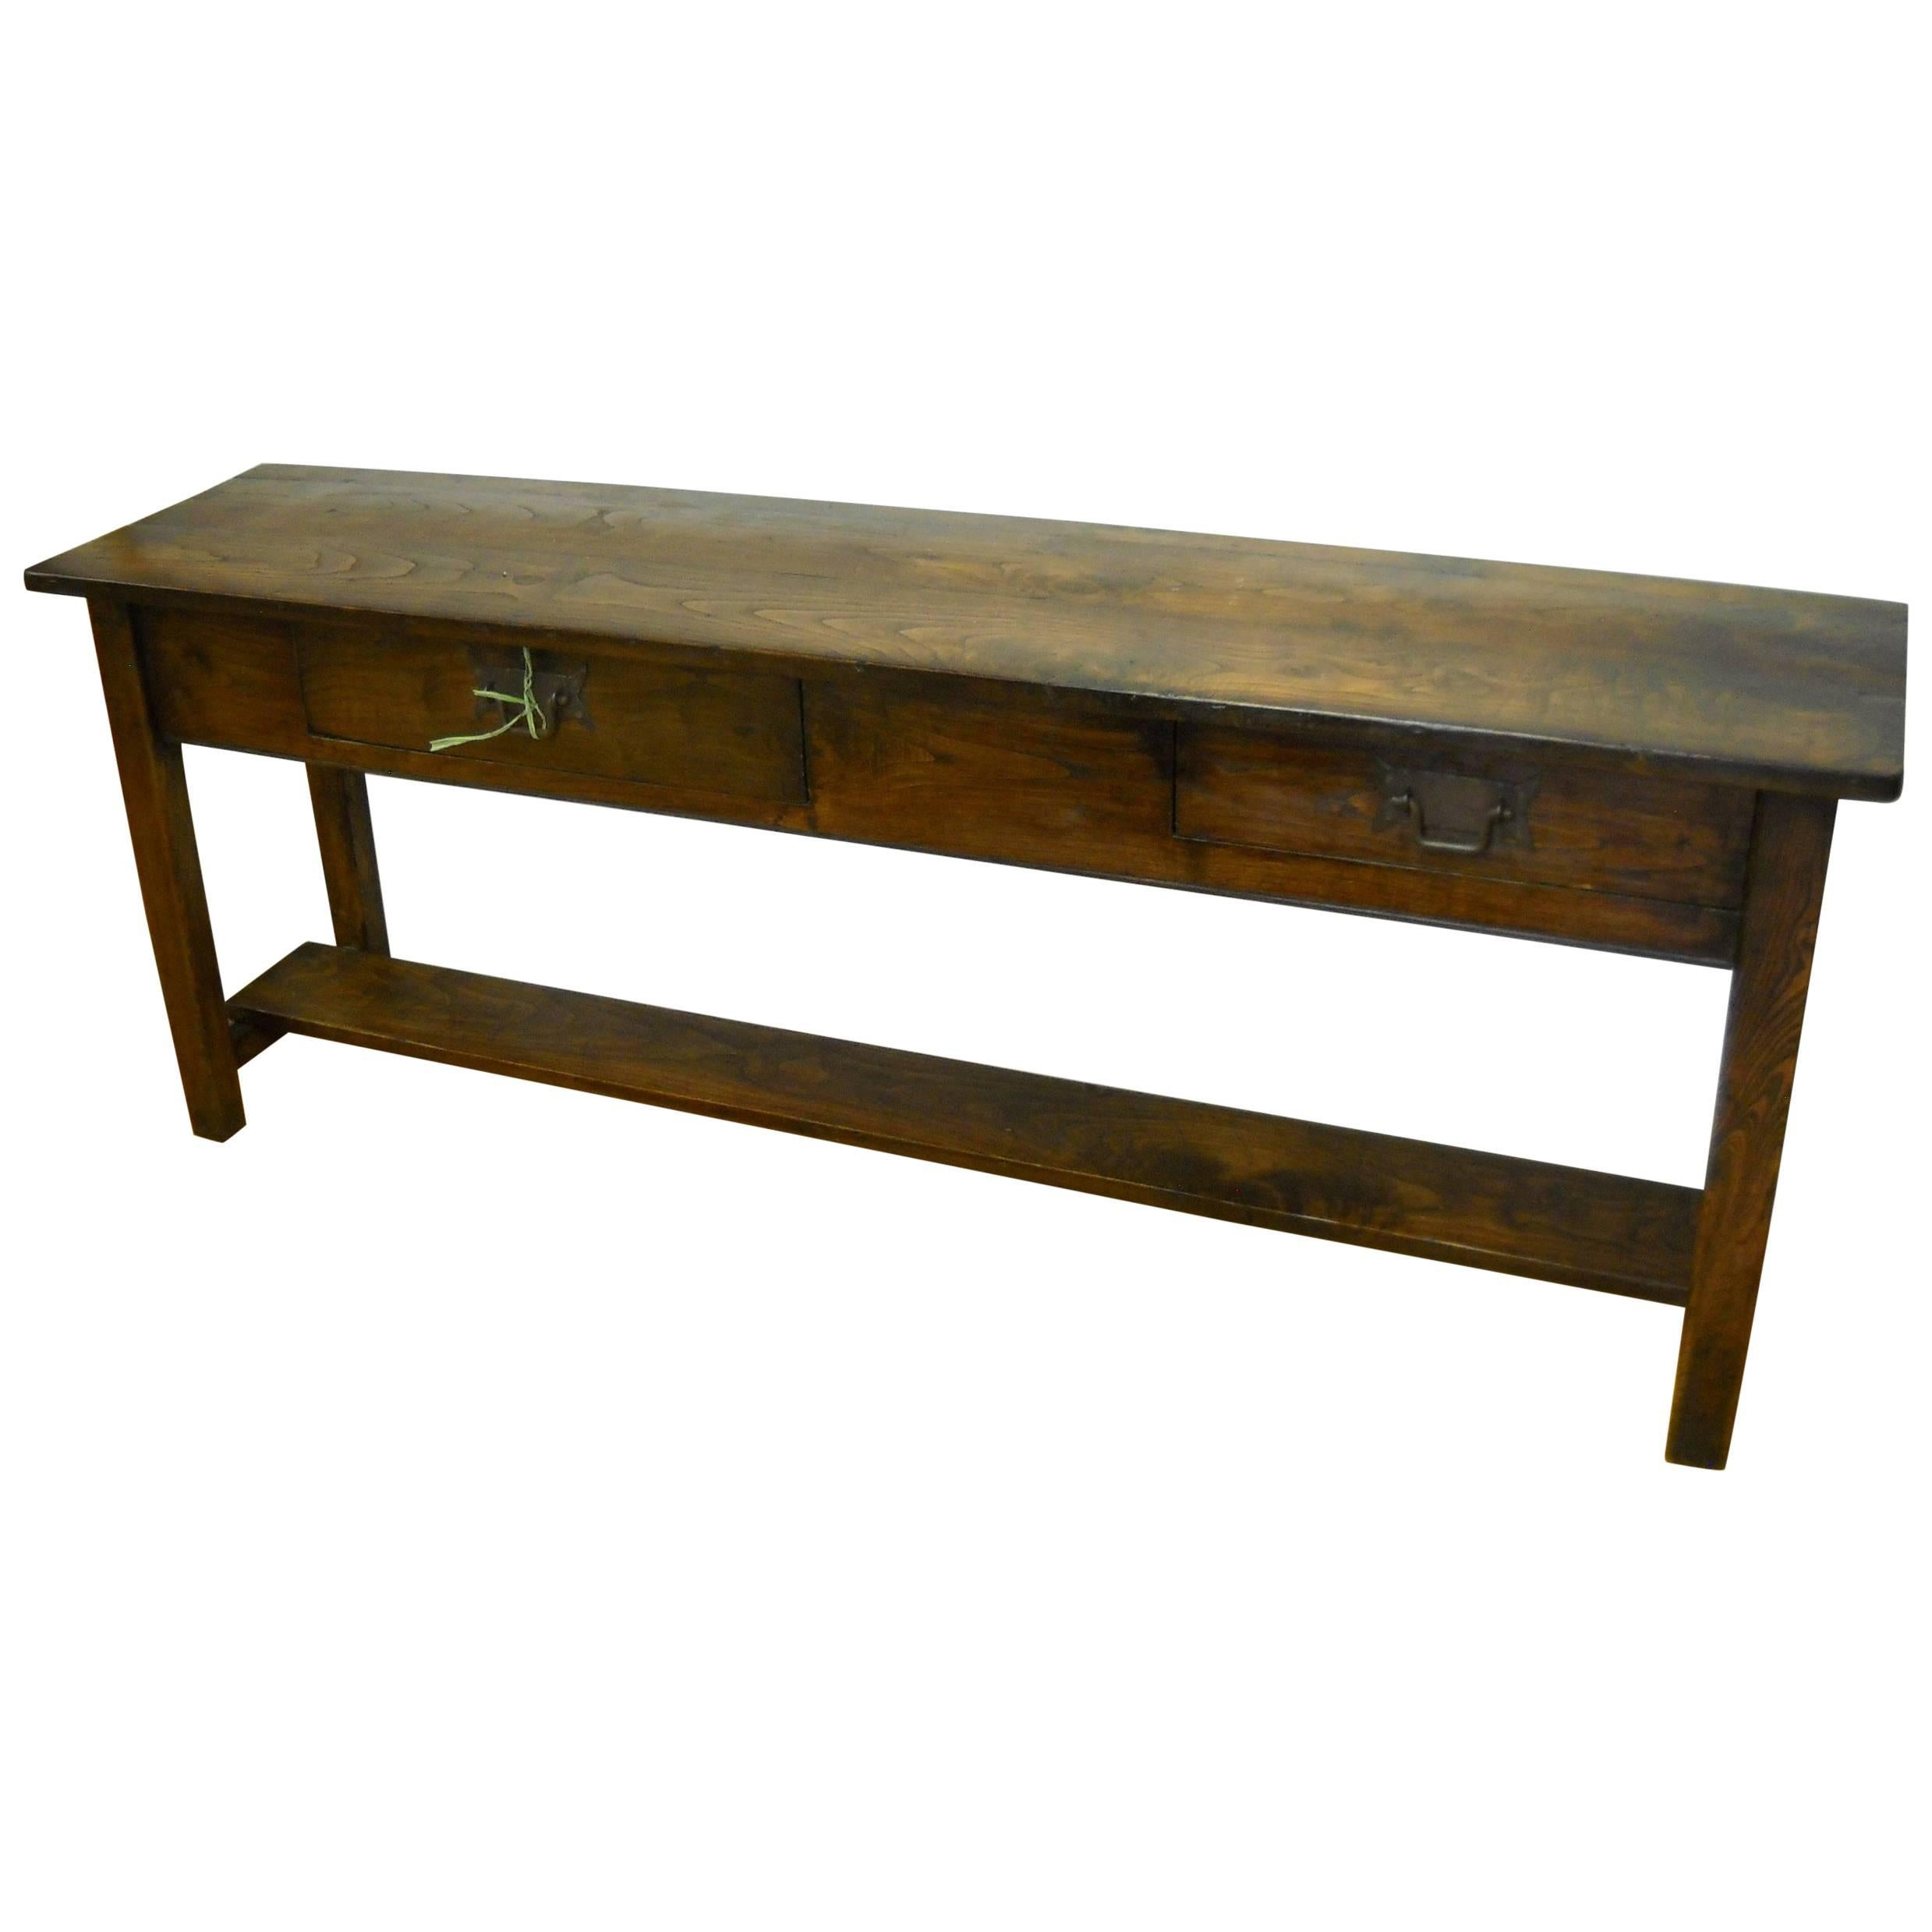 French Chestnut Serving Table